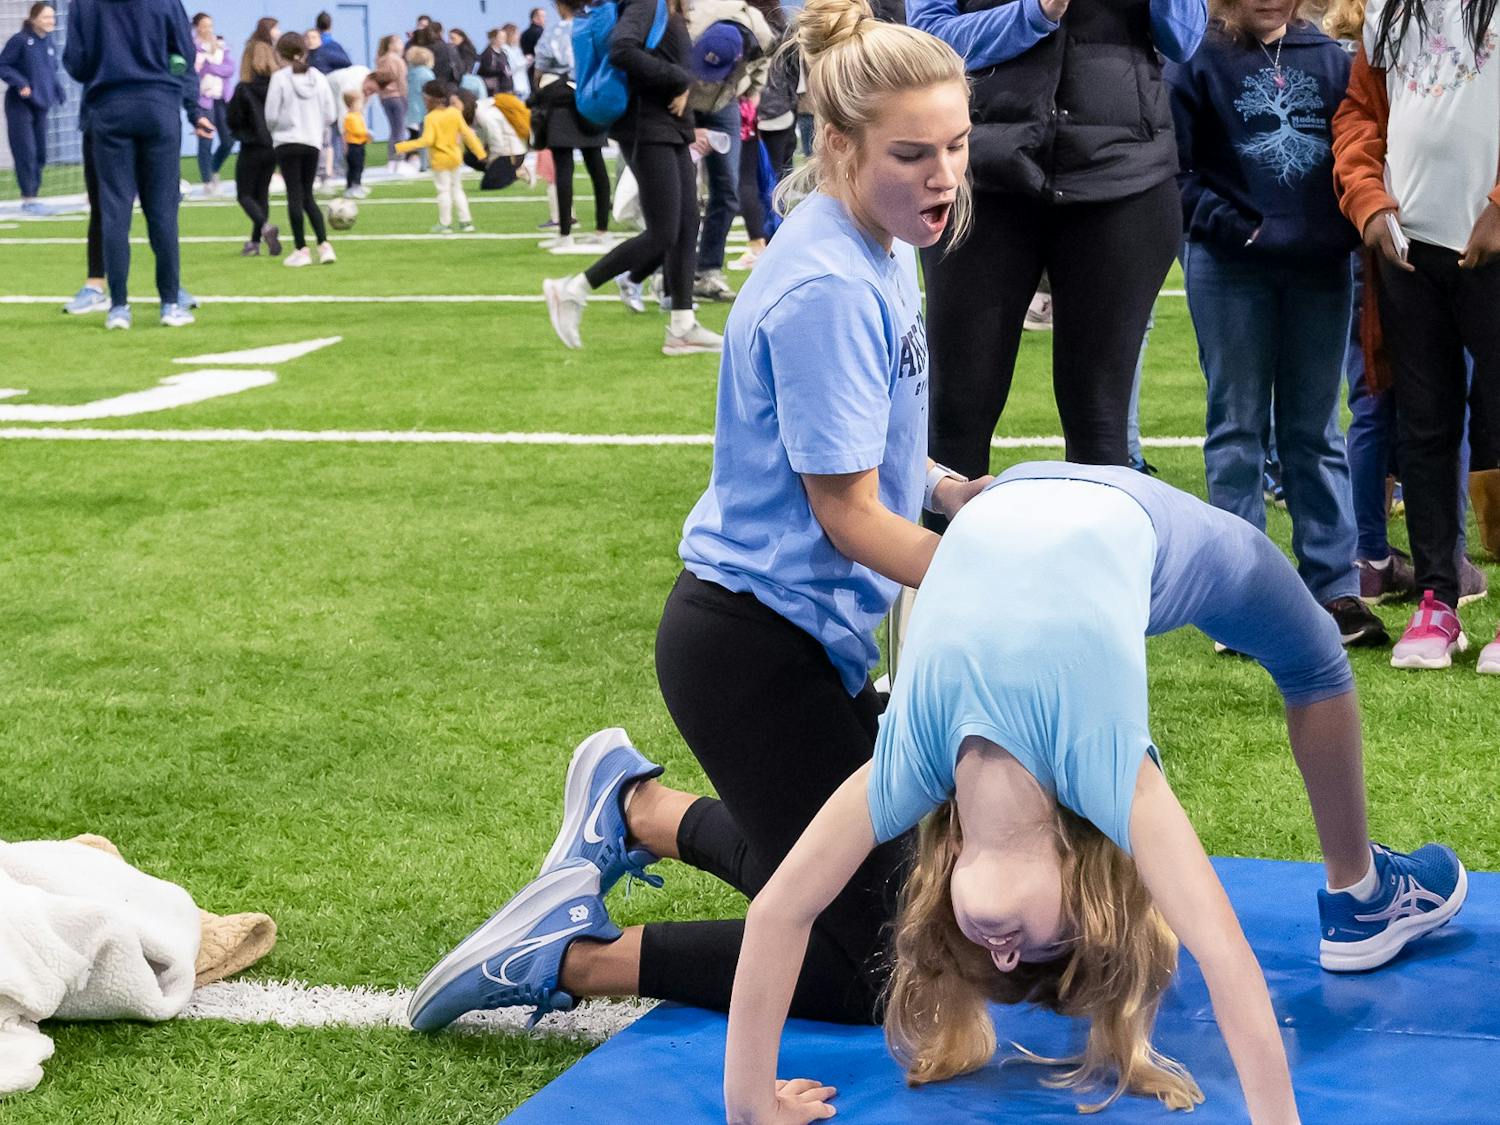 UNC senior gymnast Hallie Thompson helps Bailee Peterson do a backflip at the National Girls & Women in Sports Day event held at the Bill Koman Practice on Sunday, Jan. 22, 2023.